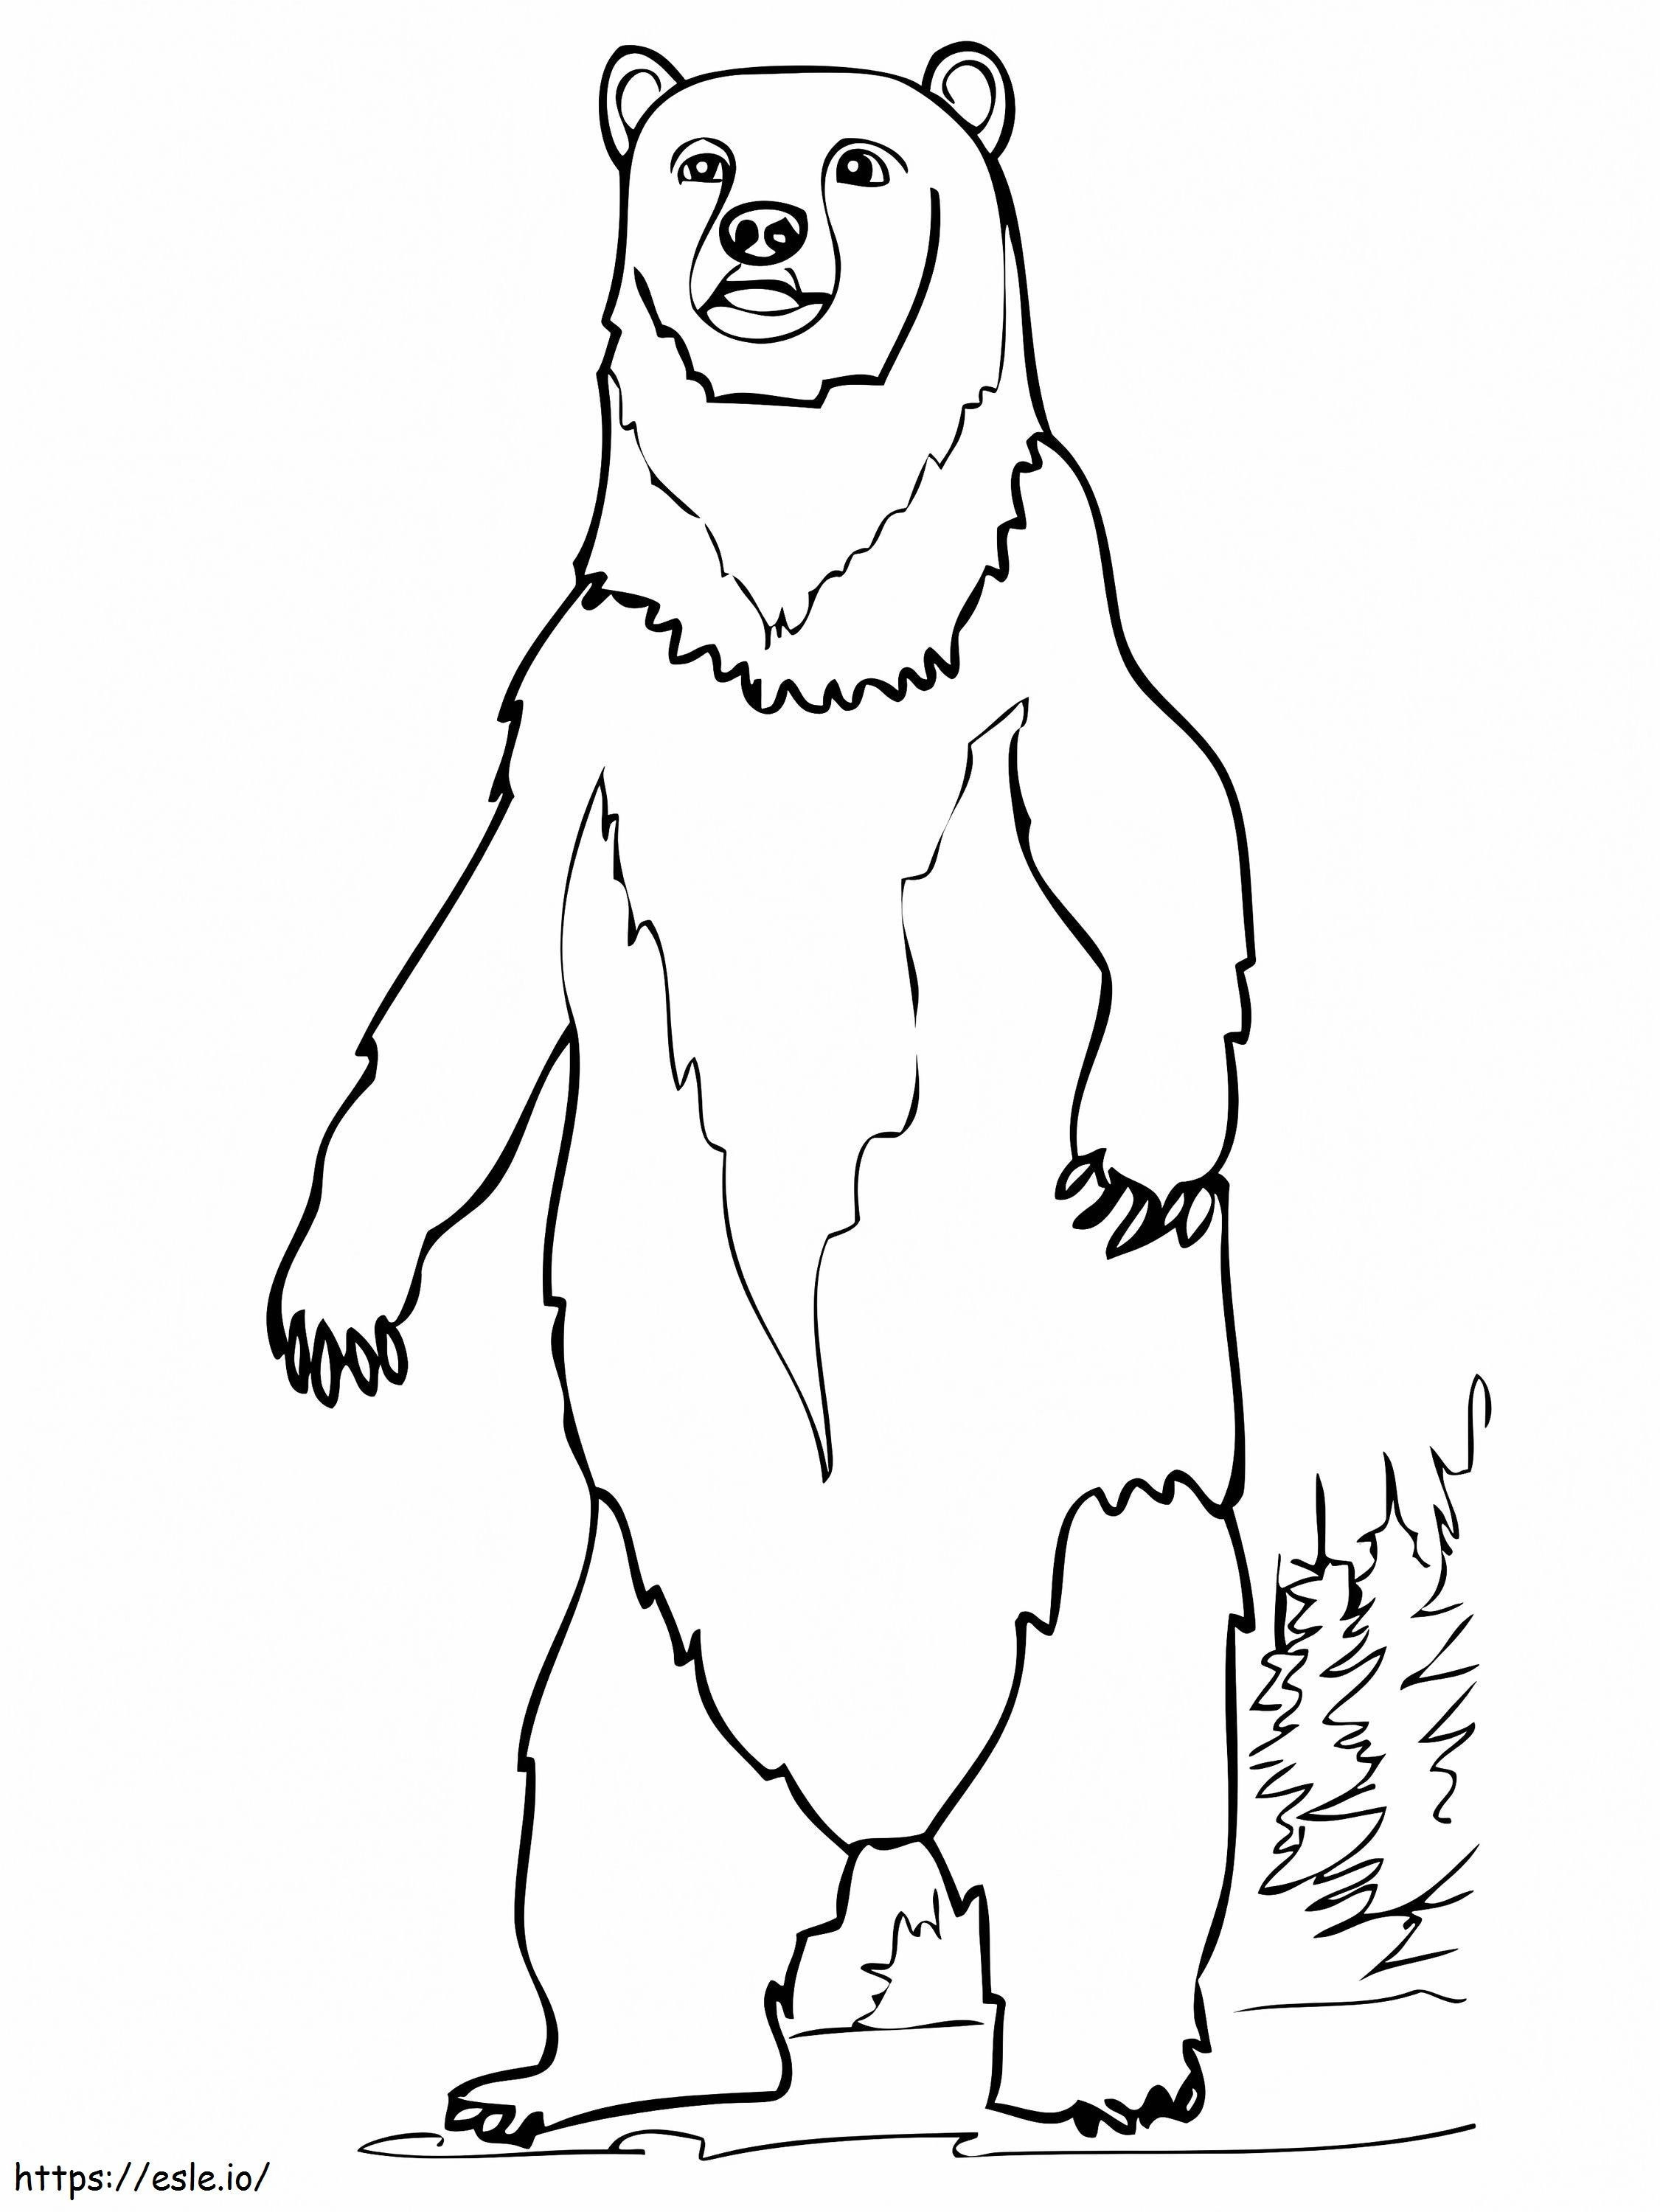 Brown Bear Standing Up coloring page